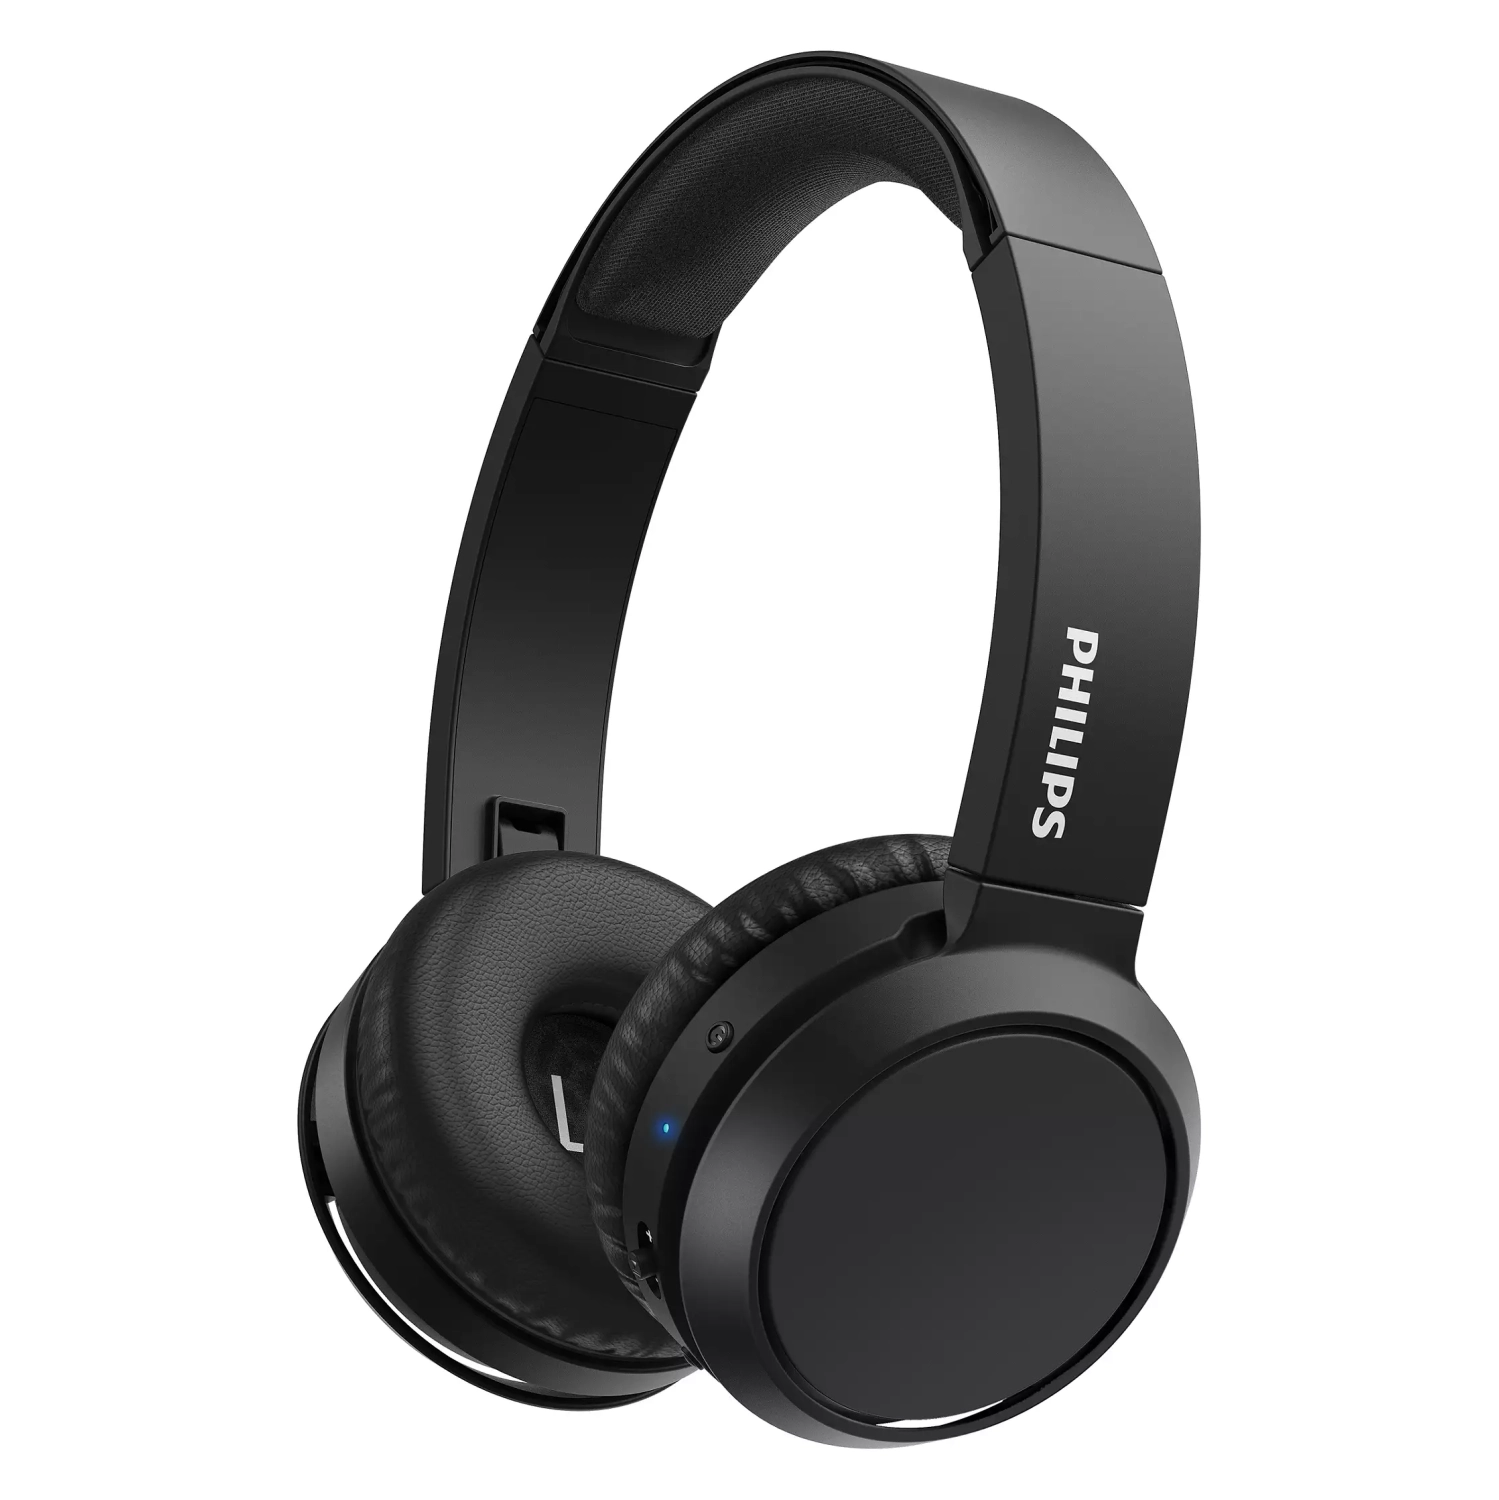 Philips H4205 On-Ear Wireless Headphones with 32mm Drivers and BASS Boost on-Demand, Black